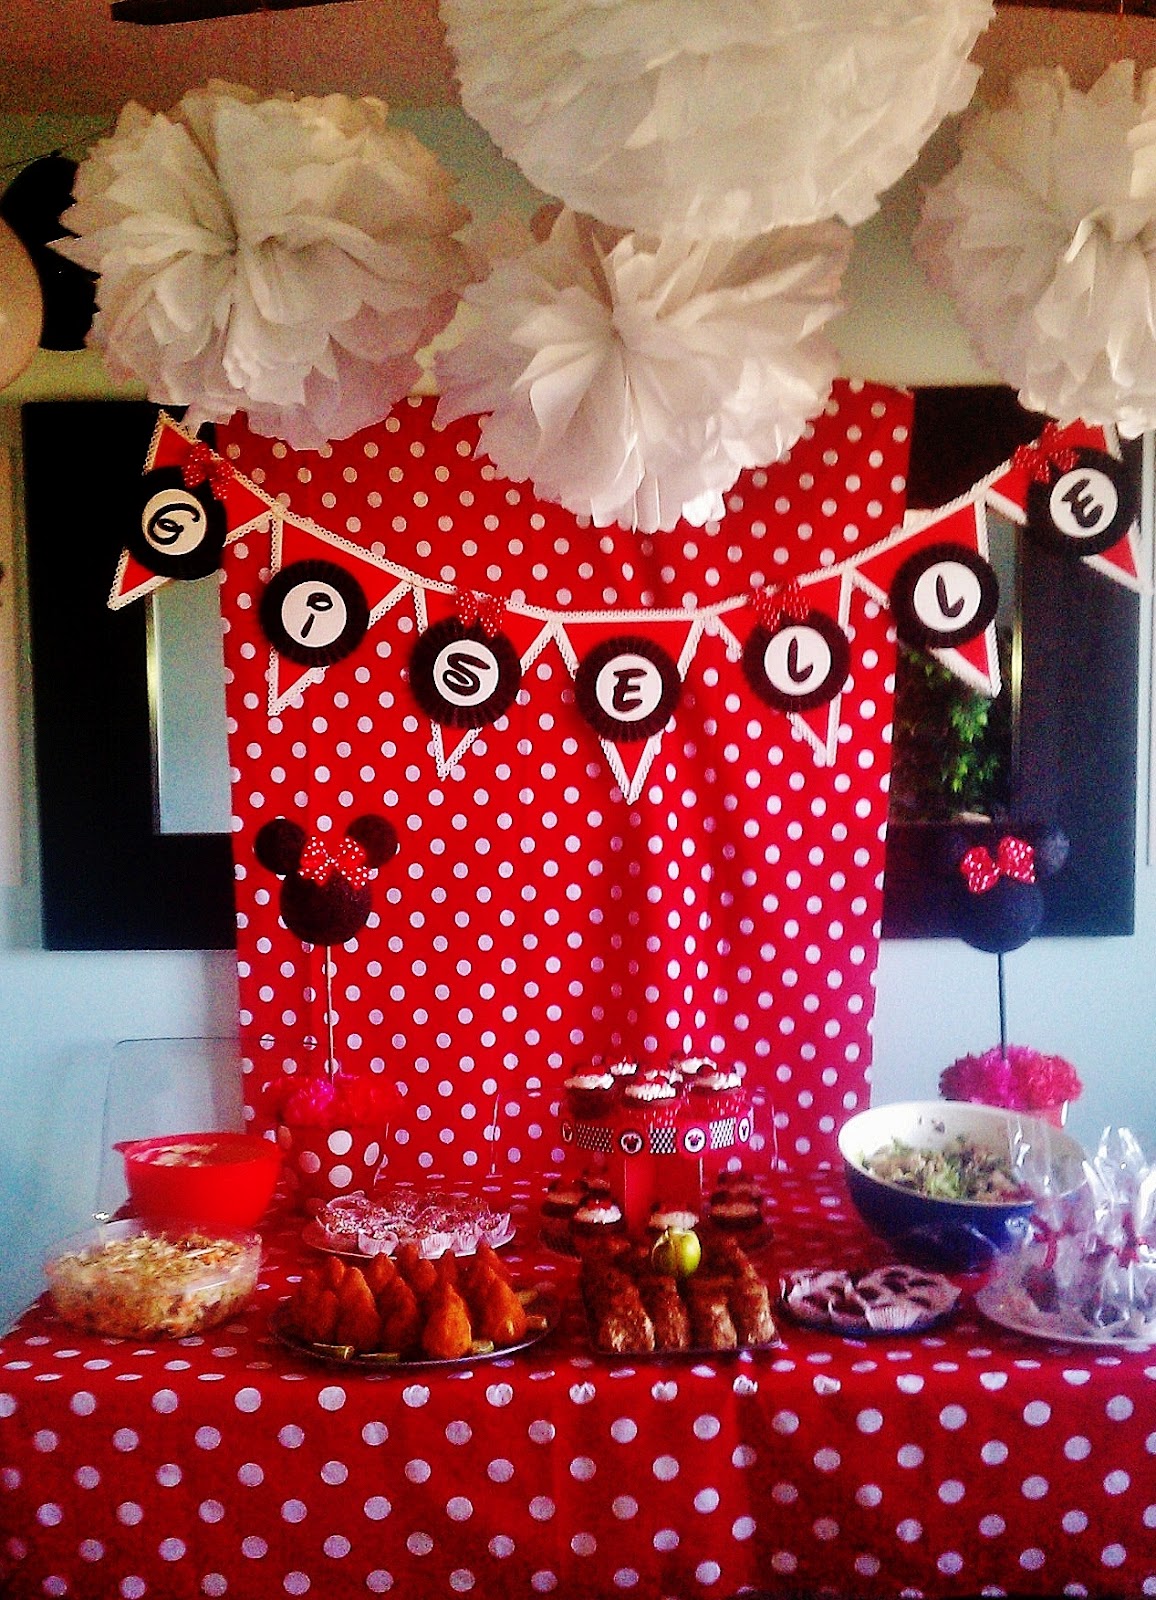 27 HQ Pictures Red And White Minnie Mouse Party Decorations : DIY Minnie Mouse Party Decor - Homemaking Rebel